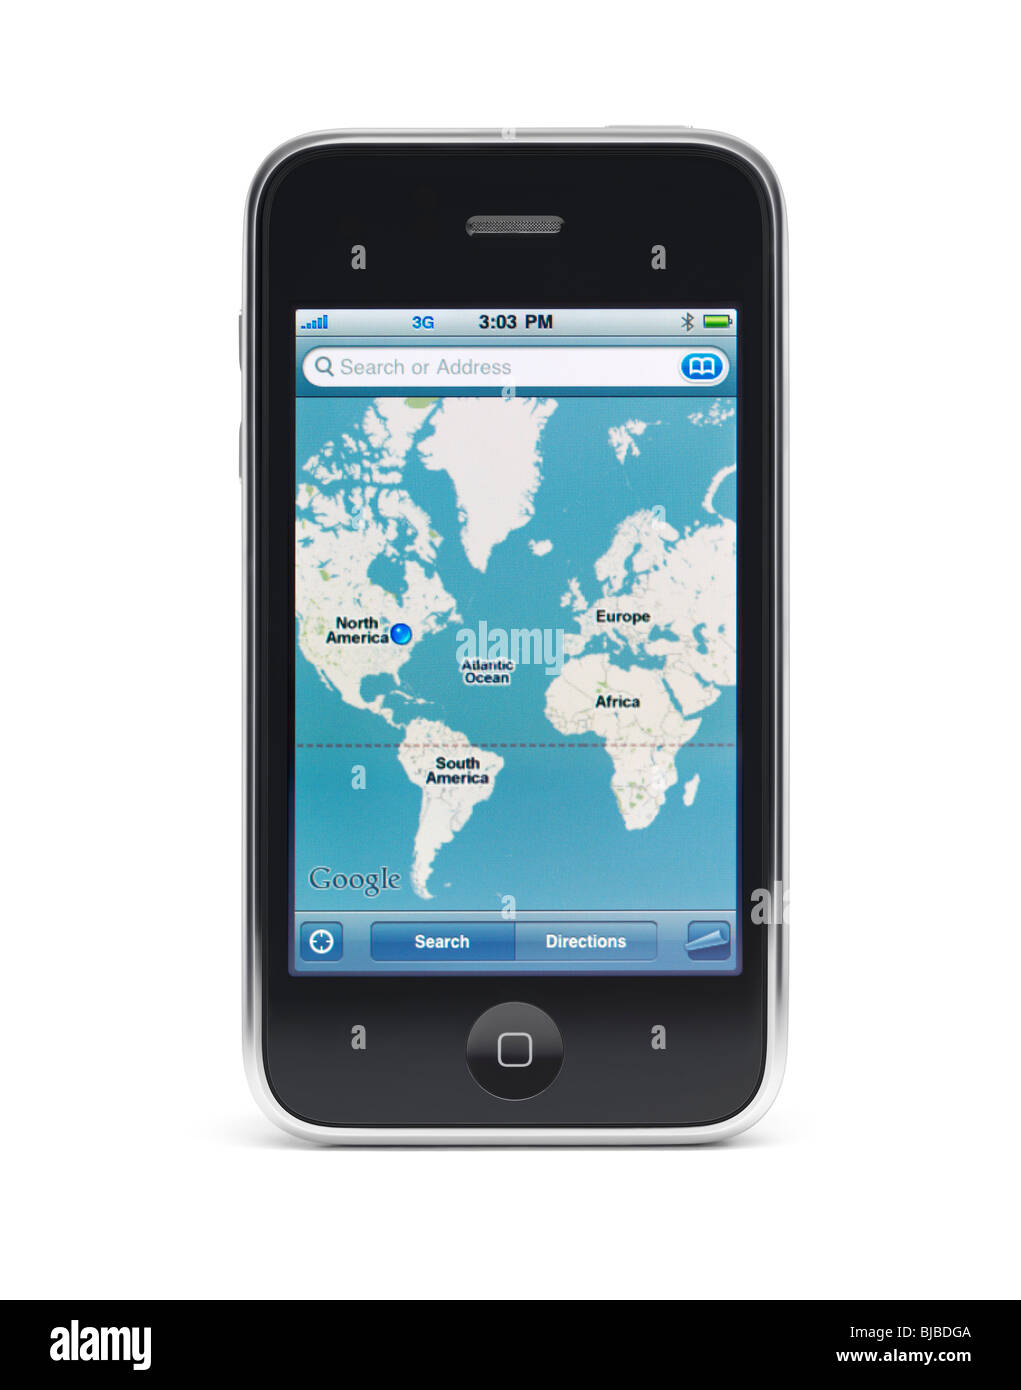 Apple iPhone 3Gs 3G smartphone displaying Google maps on the screen isolated with clipping path on white background Stock Photo